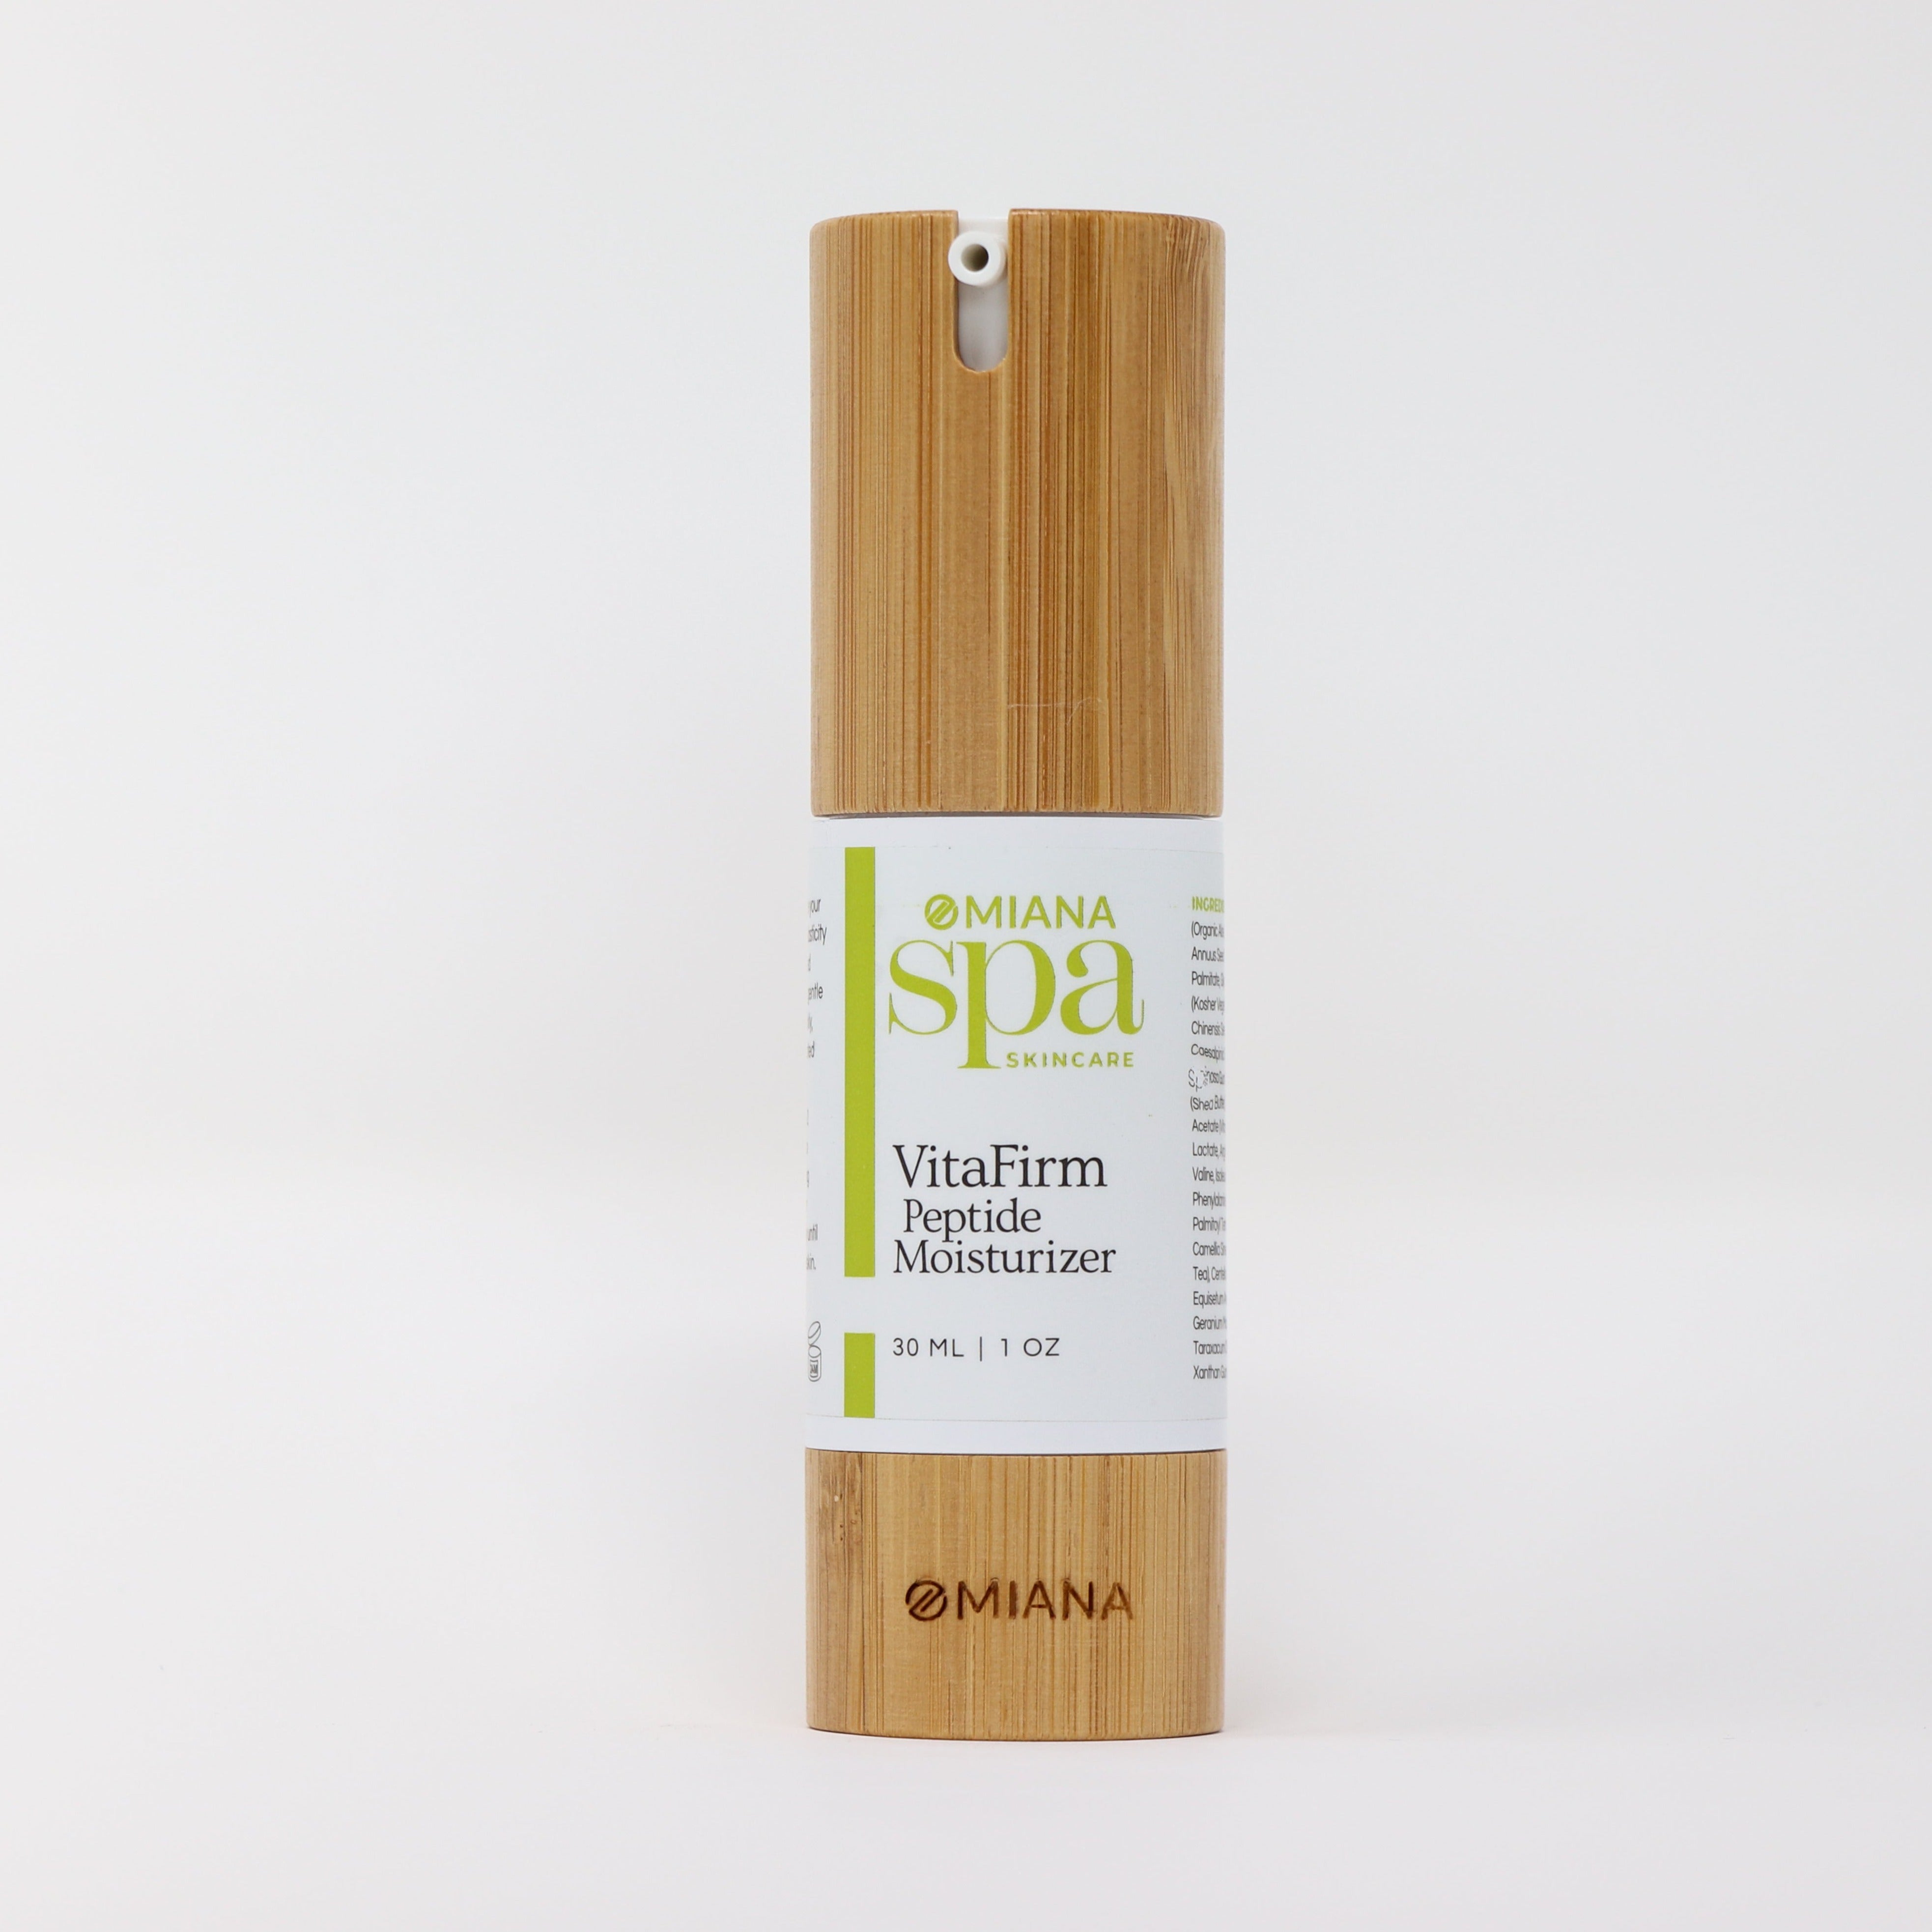 VitaFirm Peptide Moisturizer - 100% Free From GMOs, Toxins, Artificial Fragrances, & More by Omiana